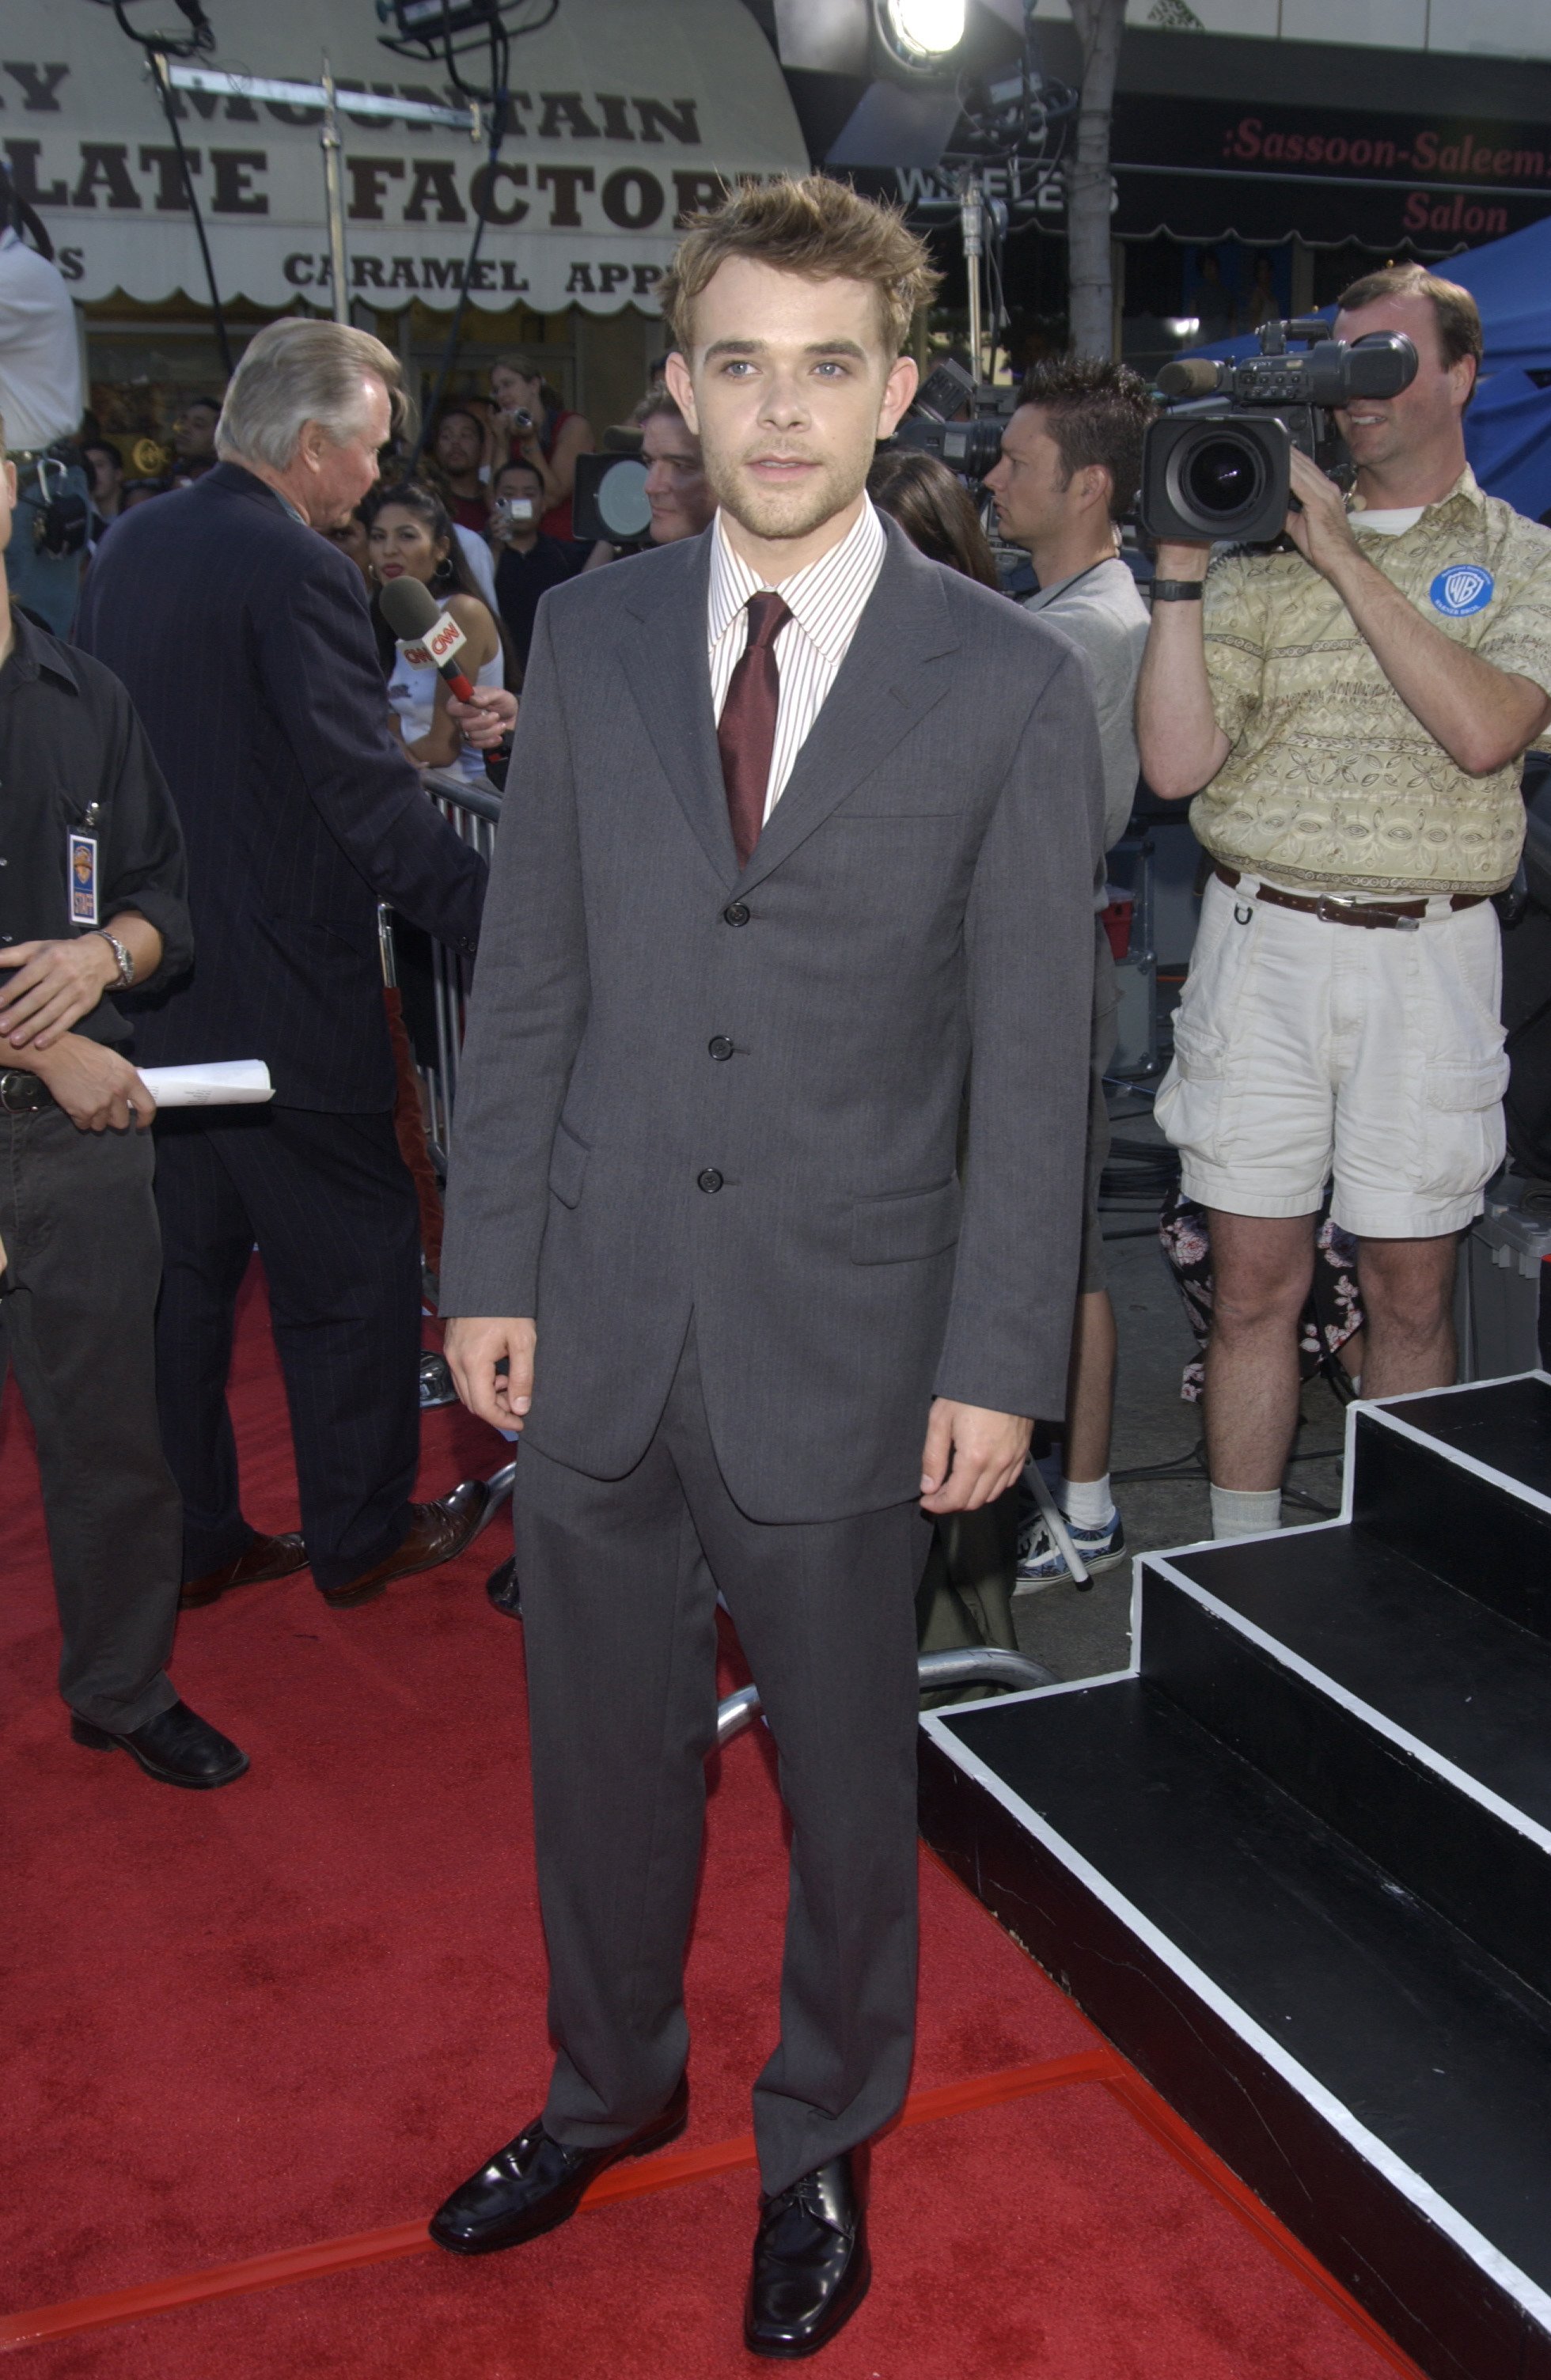 Nick Stahl at the world premiere of "Terminator 3: Rise of the Machines," on June 30, 2003 in Los Angeles | Photo: Shutterstock